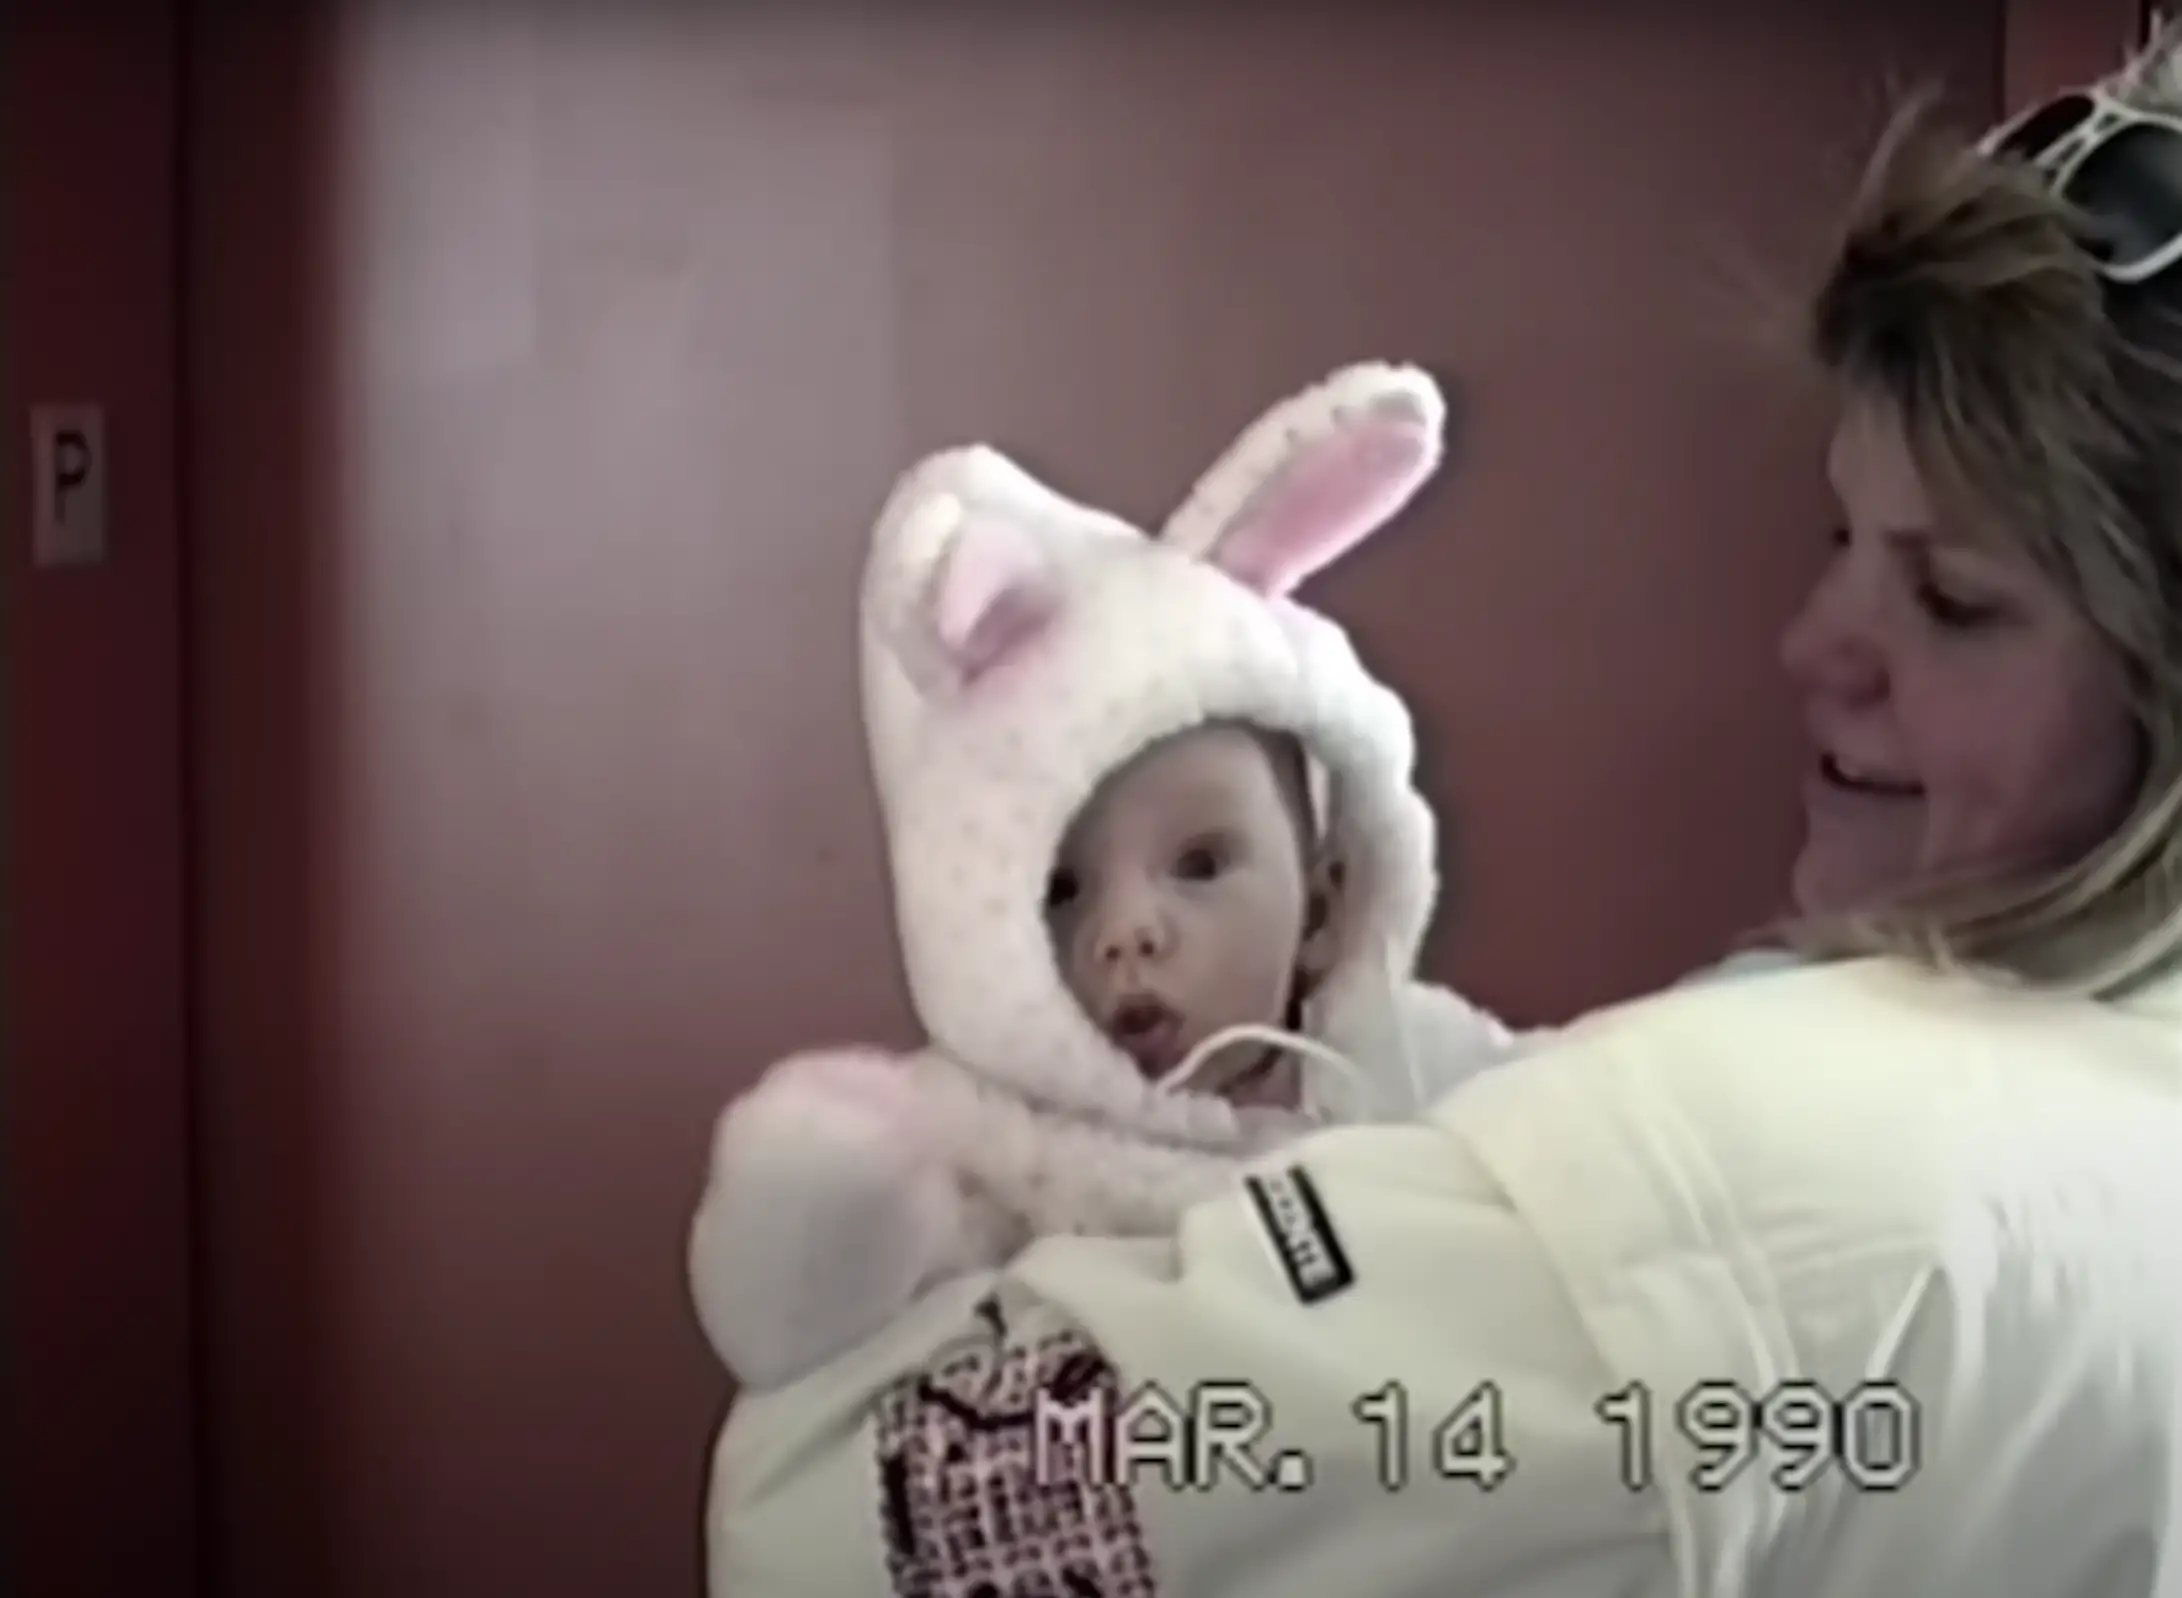 The girl as a baby with her mother | Source: youtube.com/channel/UCqECaJ8Gagnn7YCbPEzWH6g